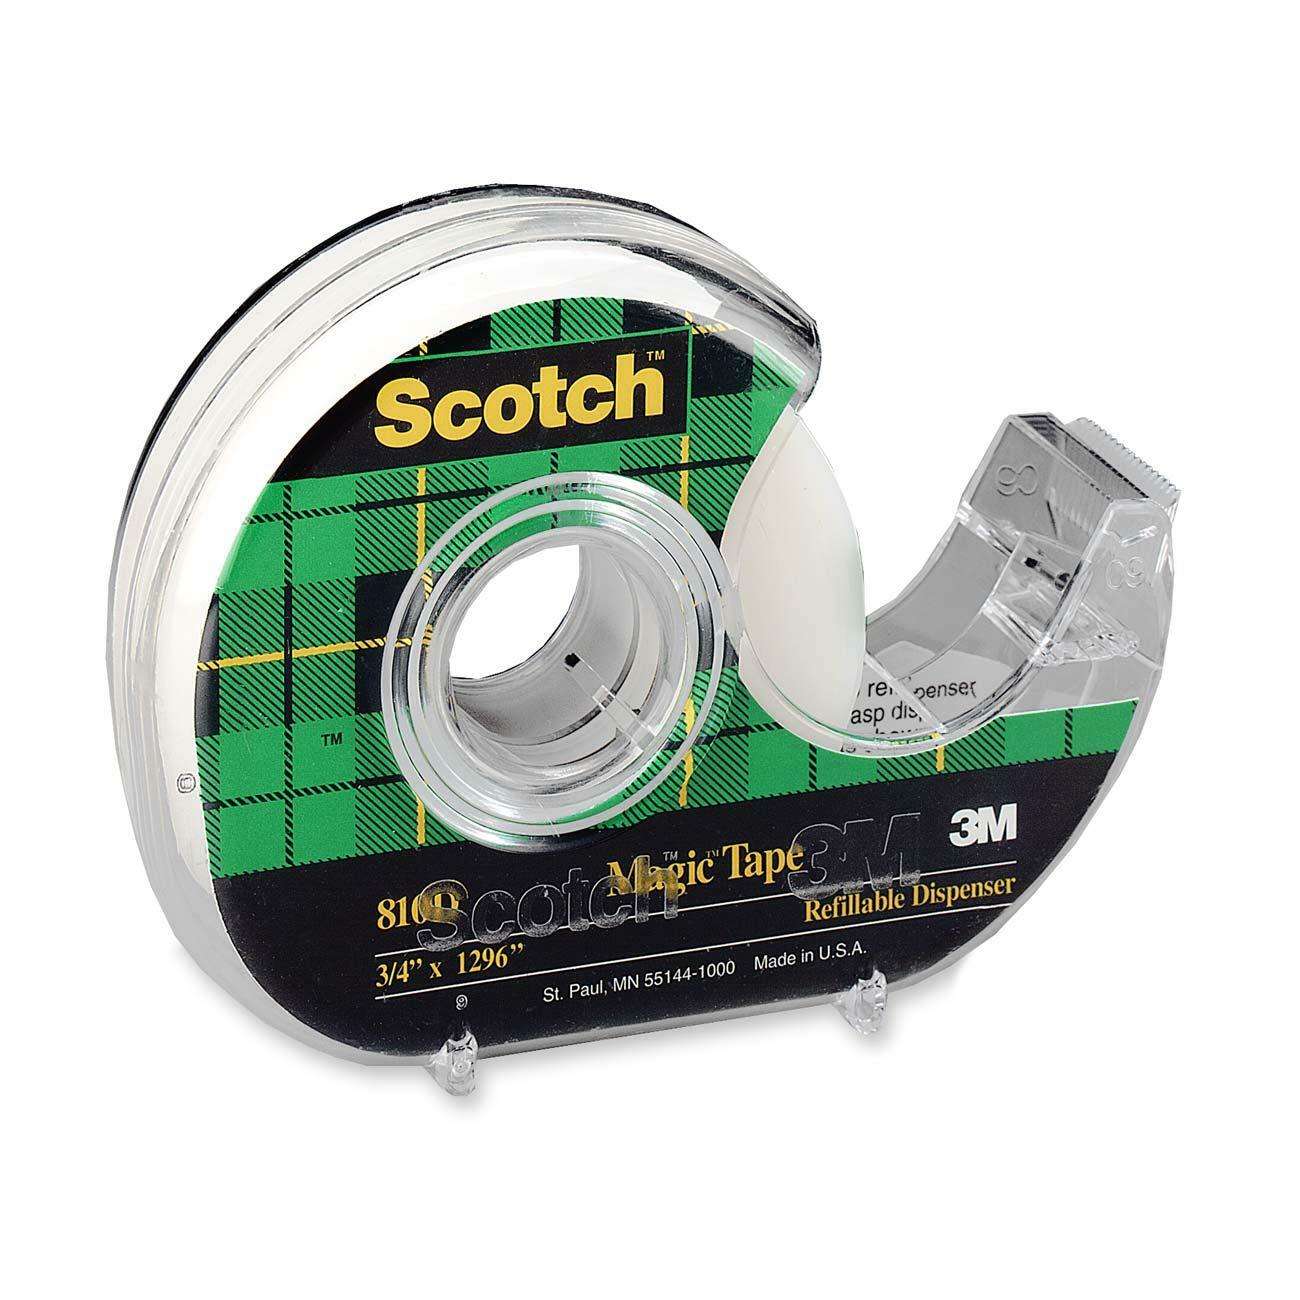 3M Scotch Magic Transparent Tape with Dispenser - 36 yd (32.9 m) Length x 0.75'' (19 mm) Width - 1'' Core  - Plastic - Photo-safe, Non-yellowing, Writable Surface, Repositionable - 1 Each - C